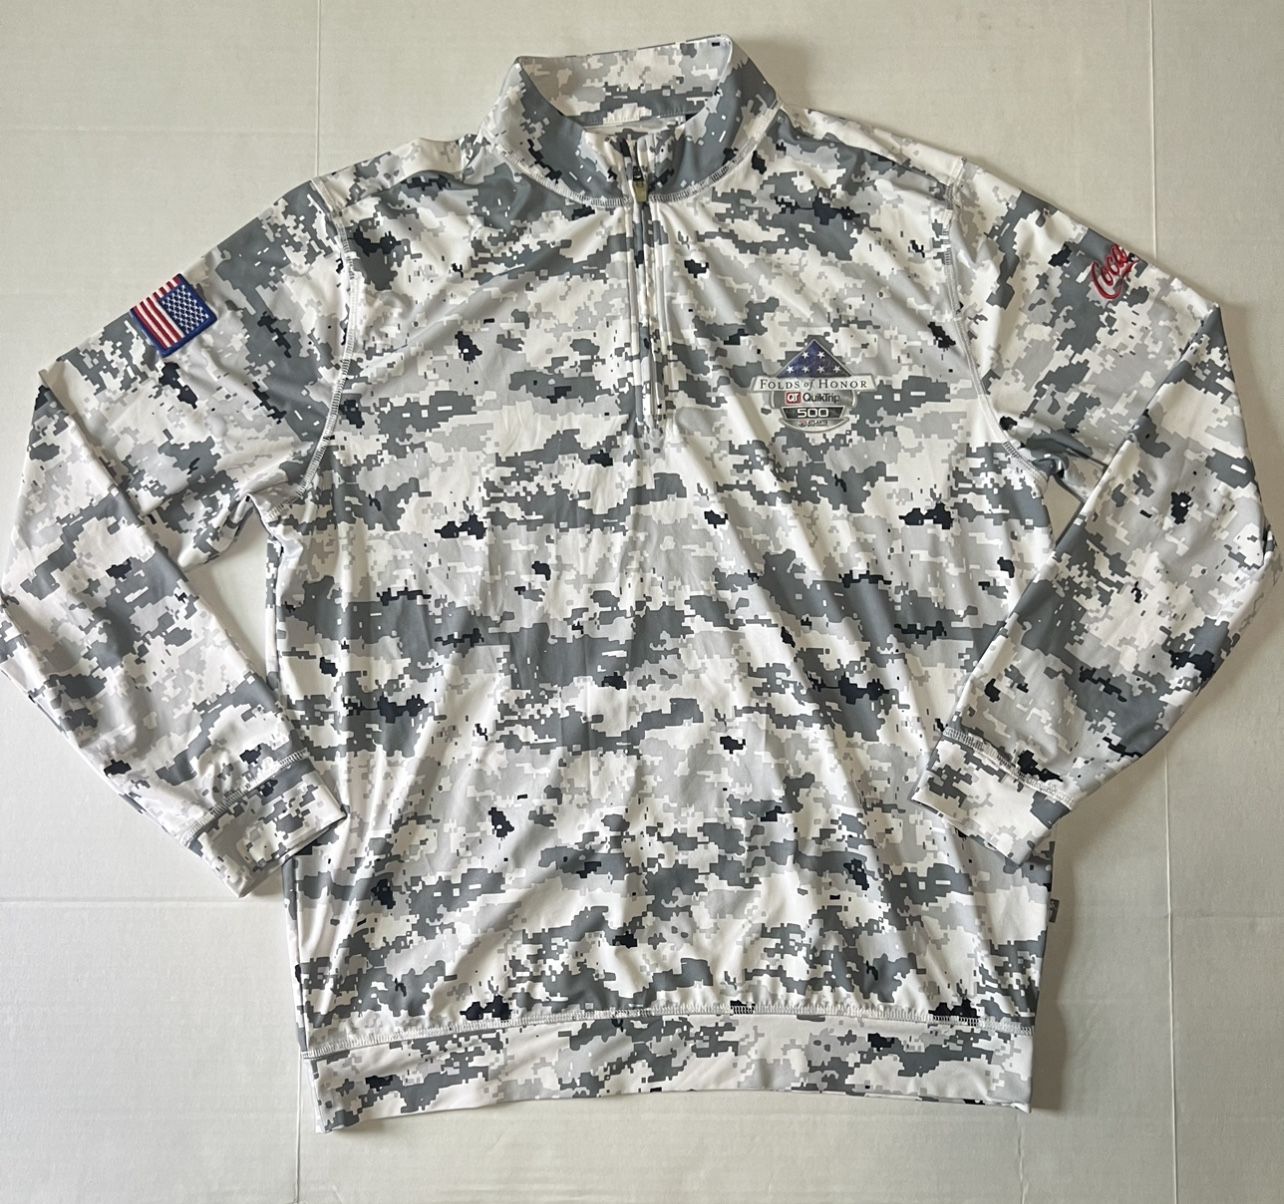 Folds of honor Quick Trip 500 Atlanta speed way long sleeve pullover size large